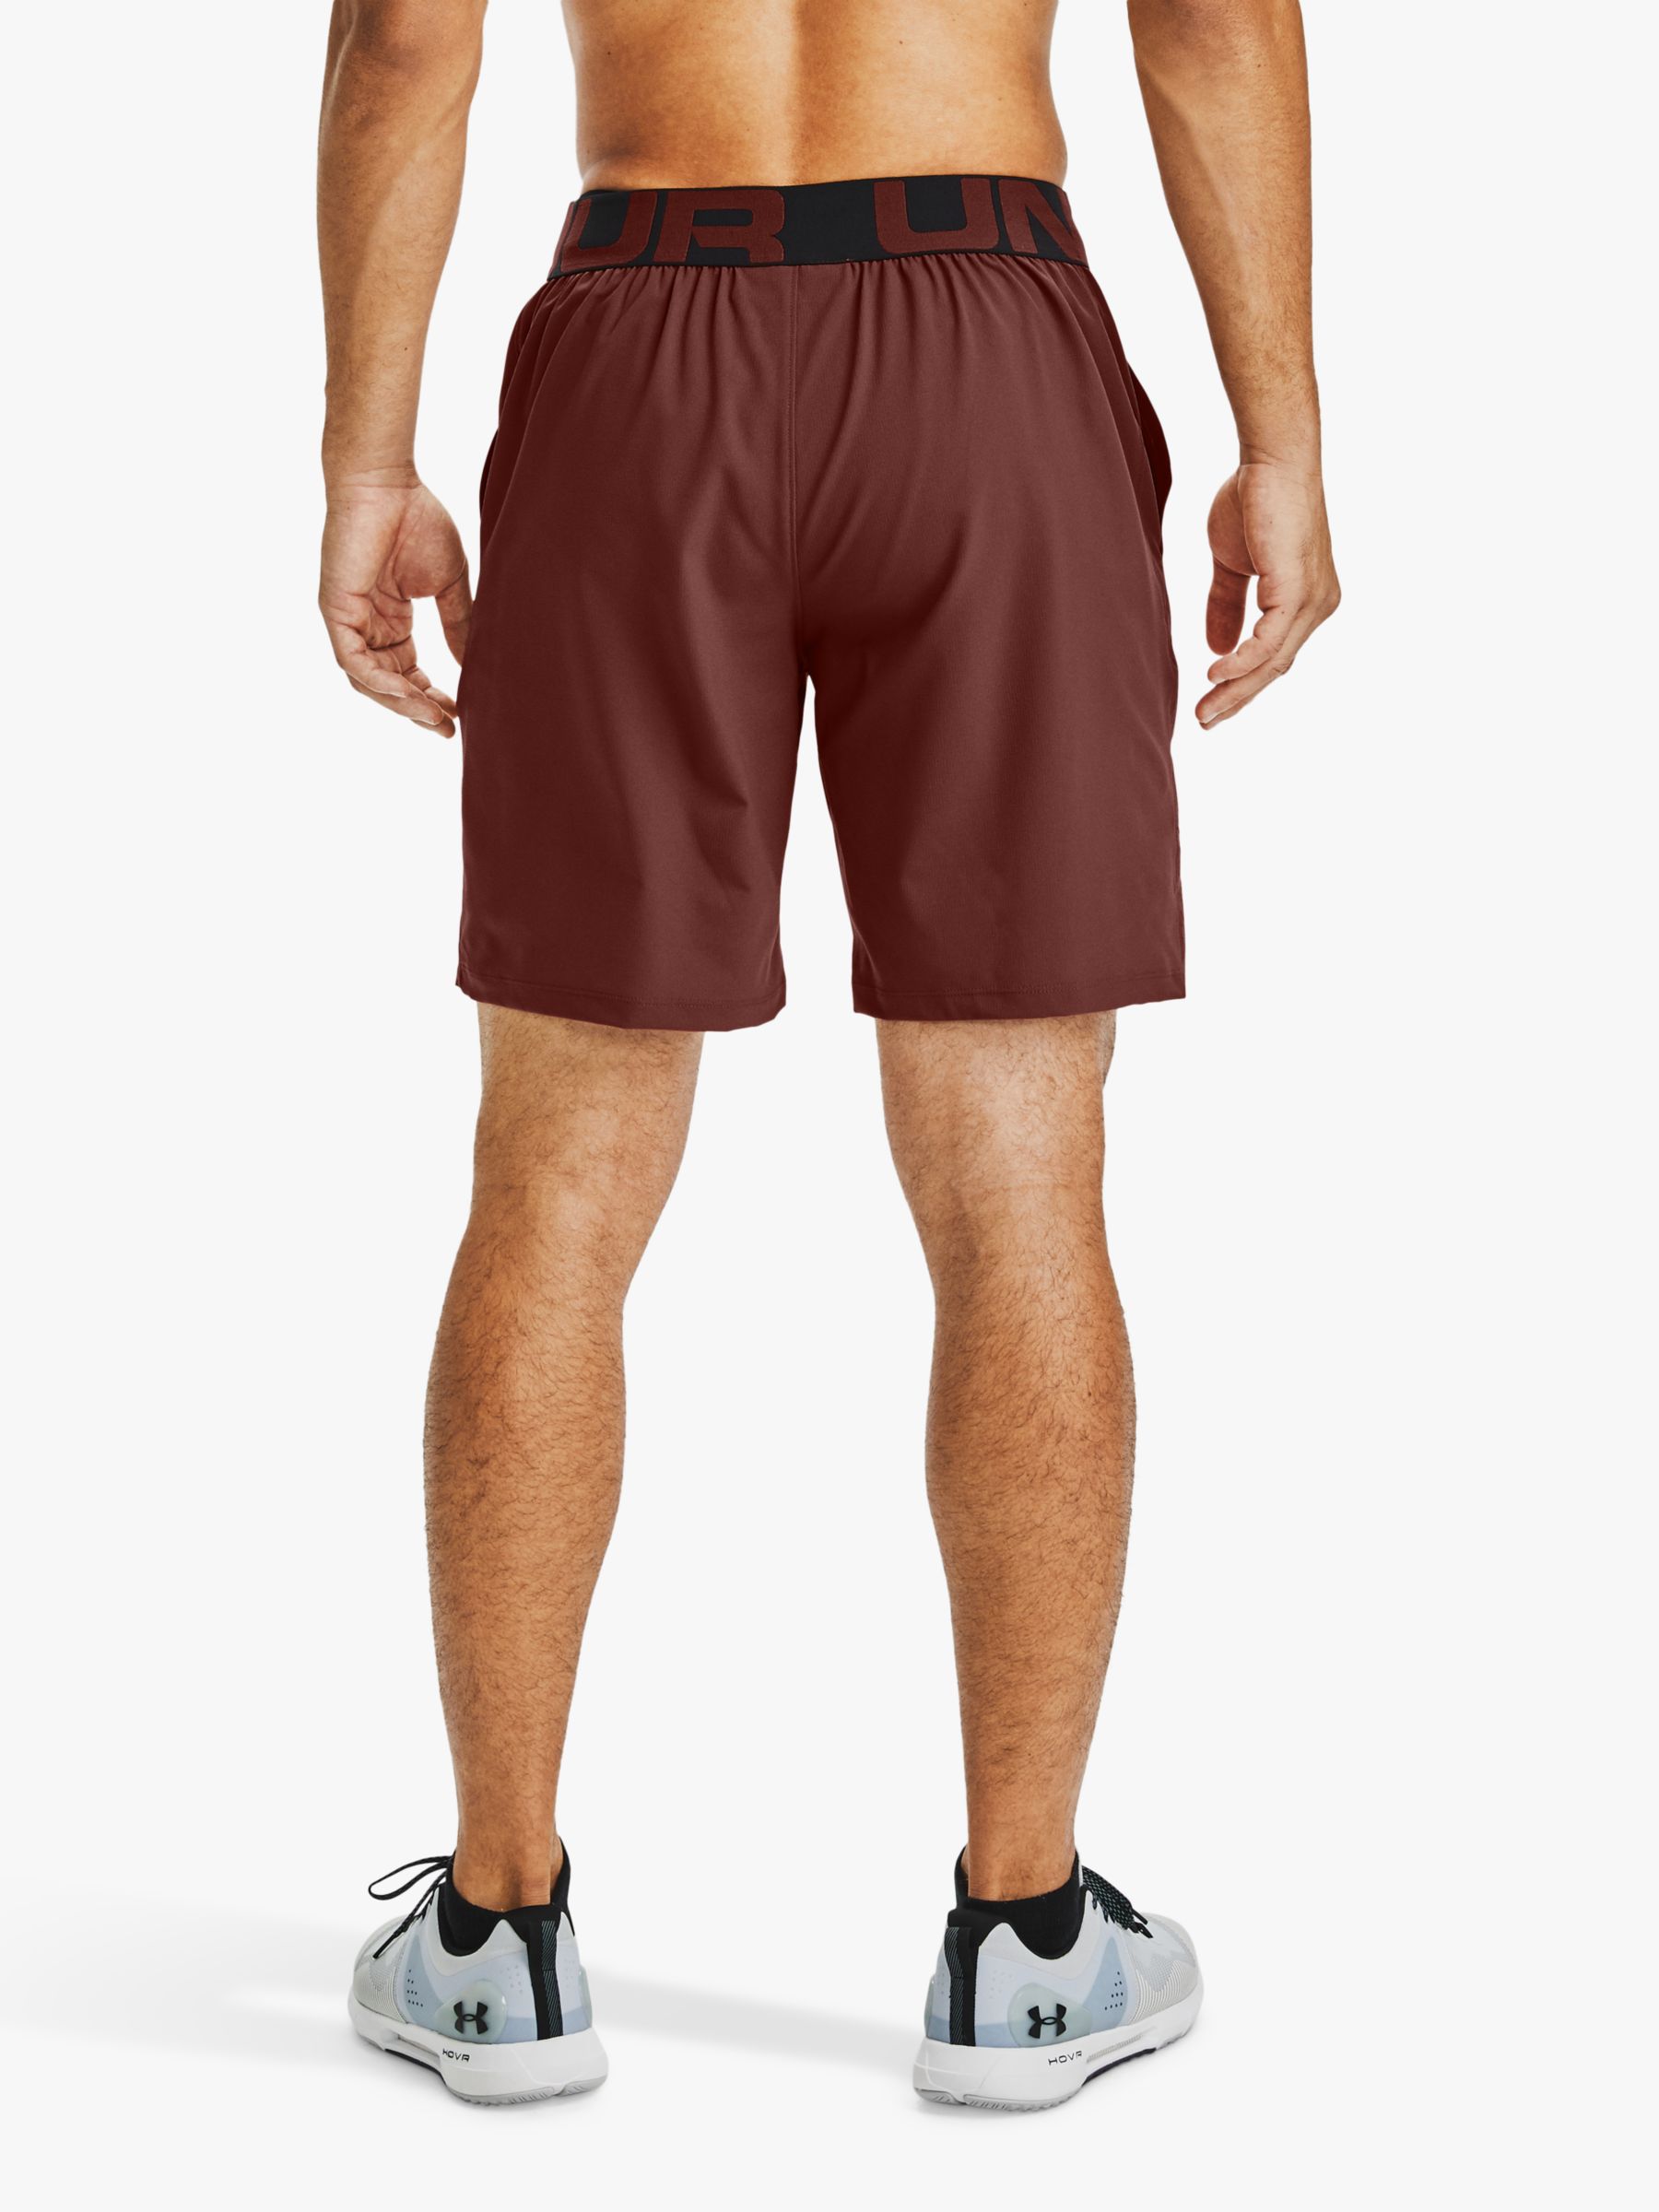 Download Under Armour Vanish Woven Training Shorts, Cinna Red at ...